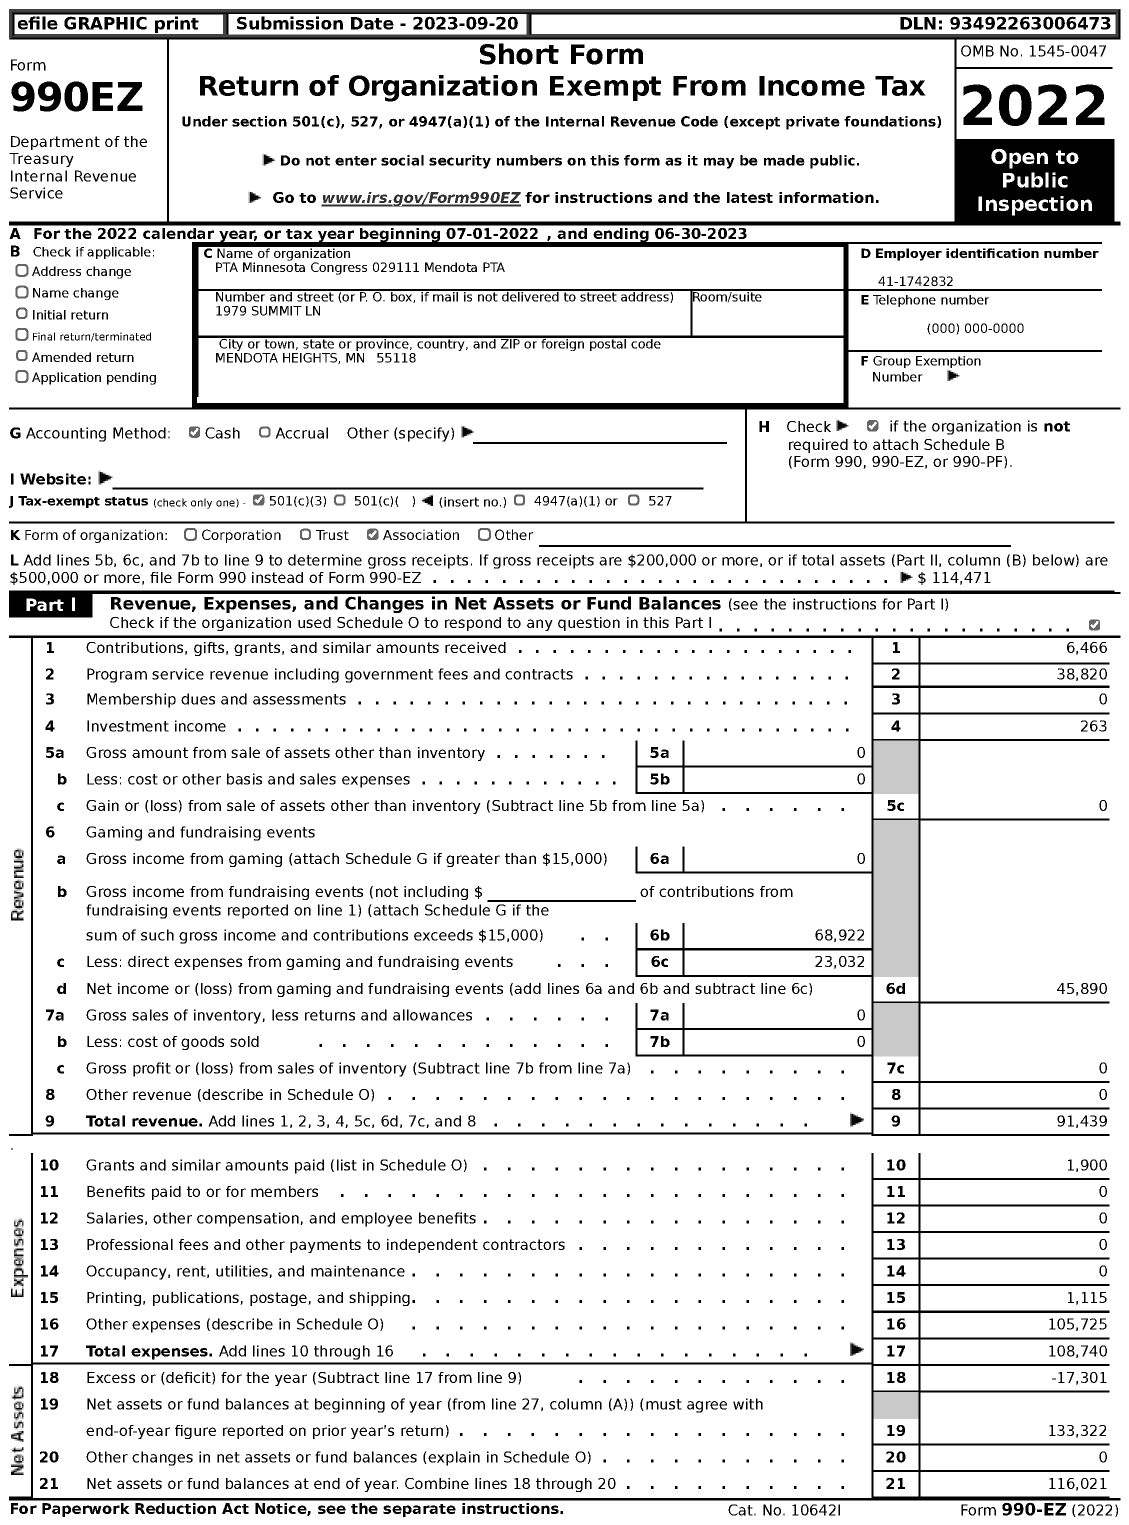 Image of first page of 2022 Form 990EZ for PTA Minnesota Congress 029111 Mendota PTA